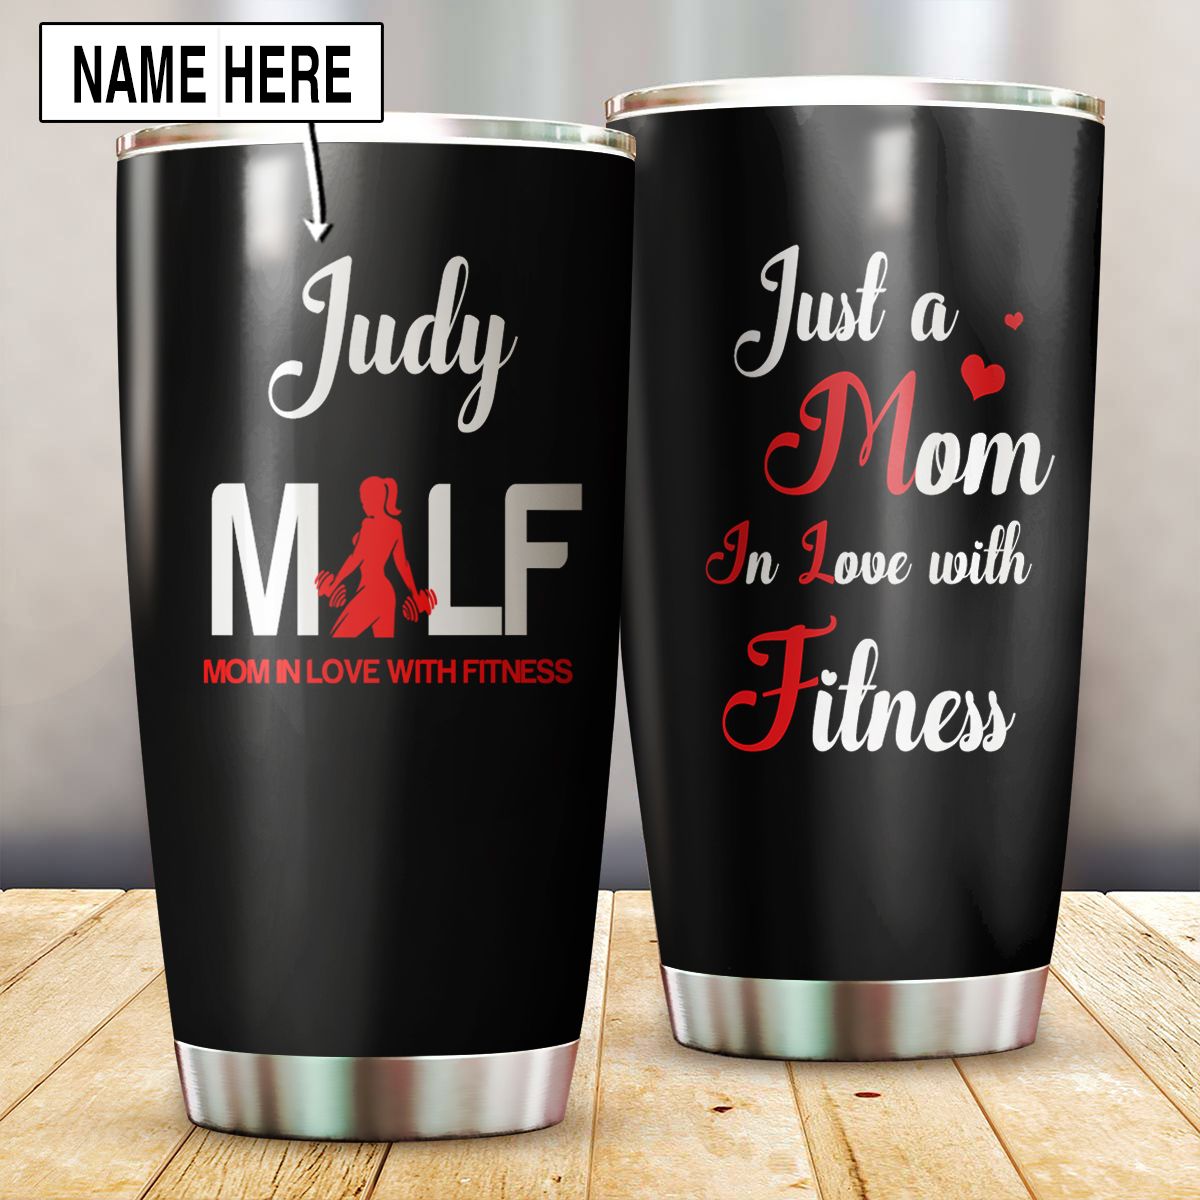 Upgraded to MILF Tumbler - Funny Gifts for New Mom